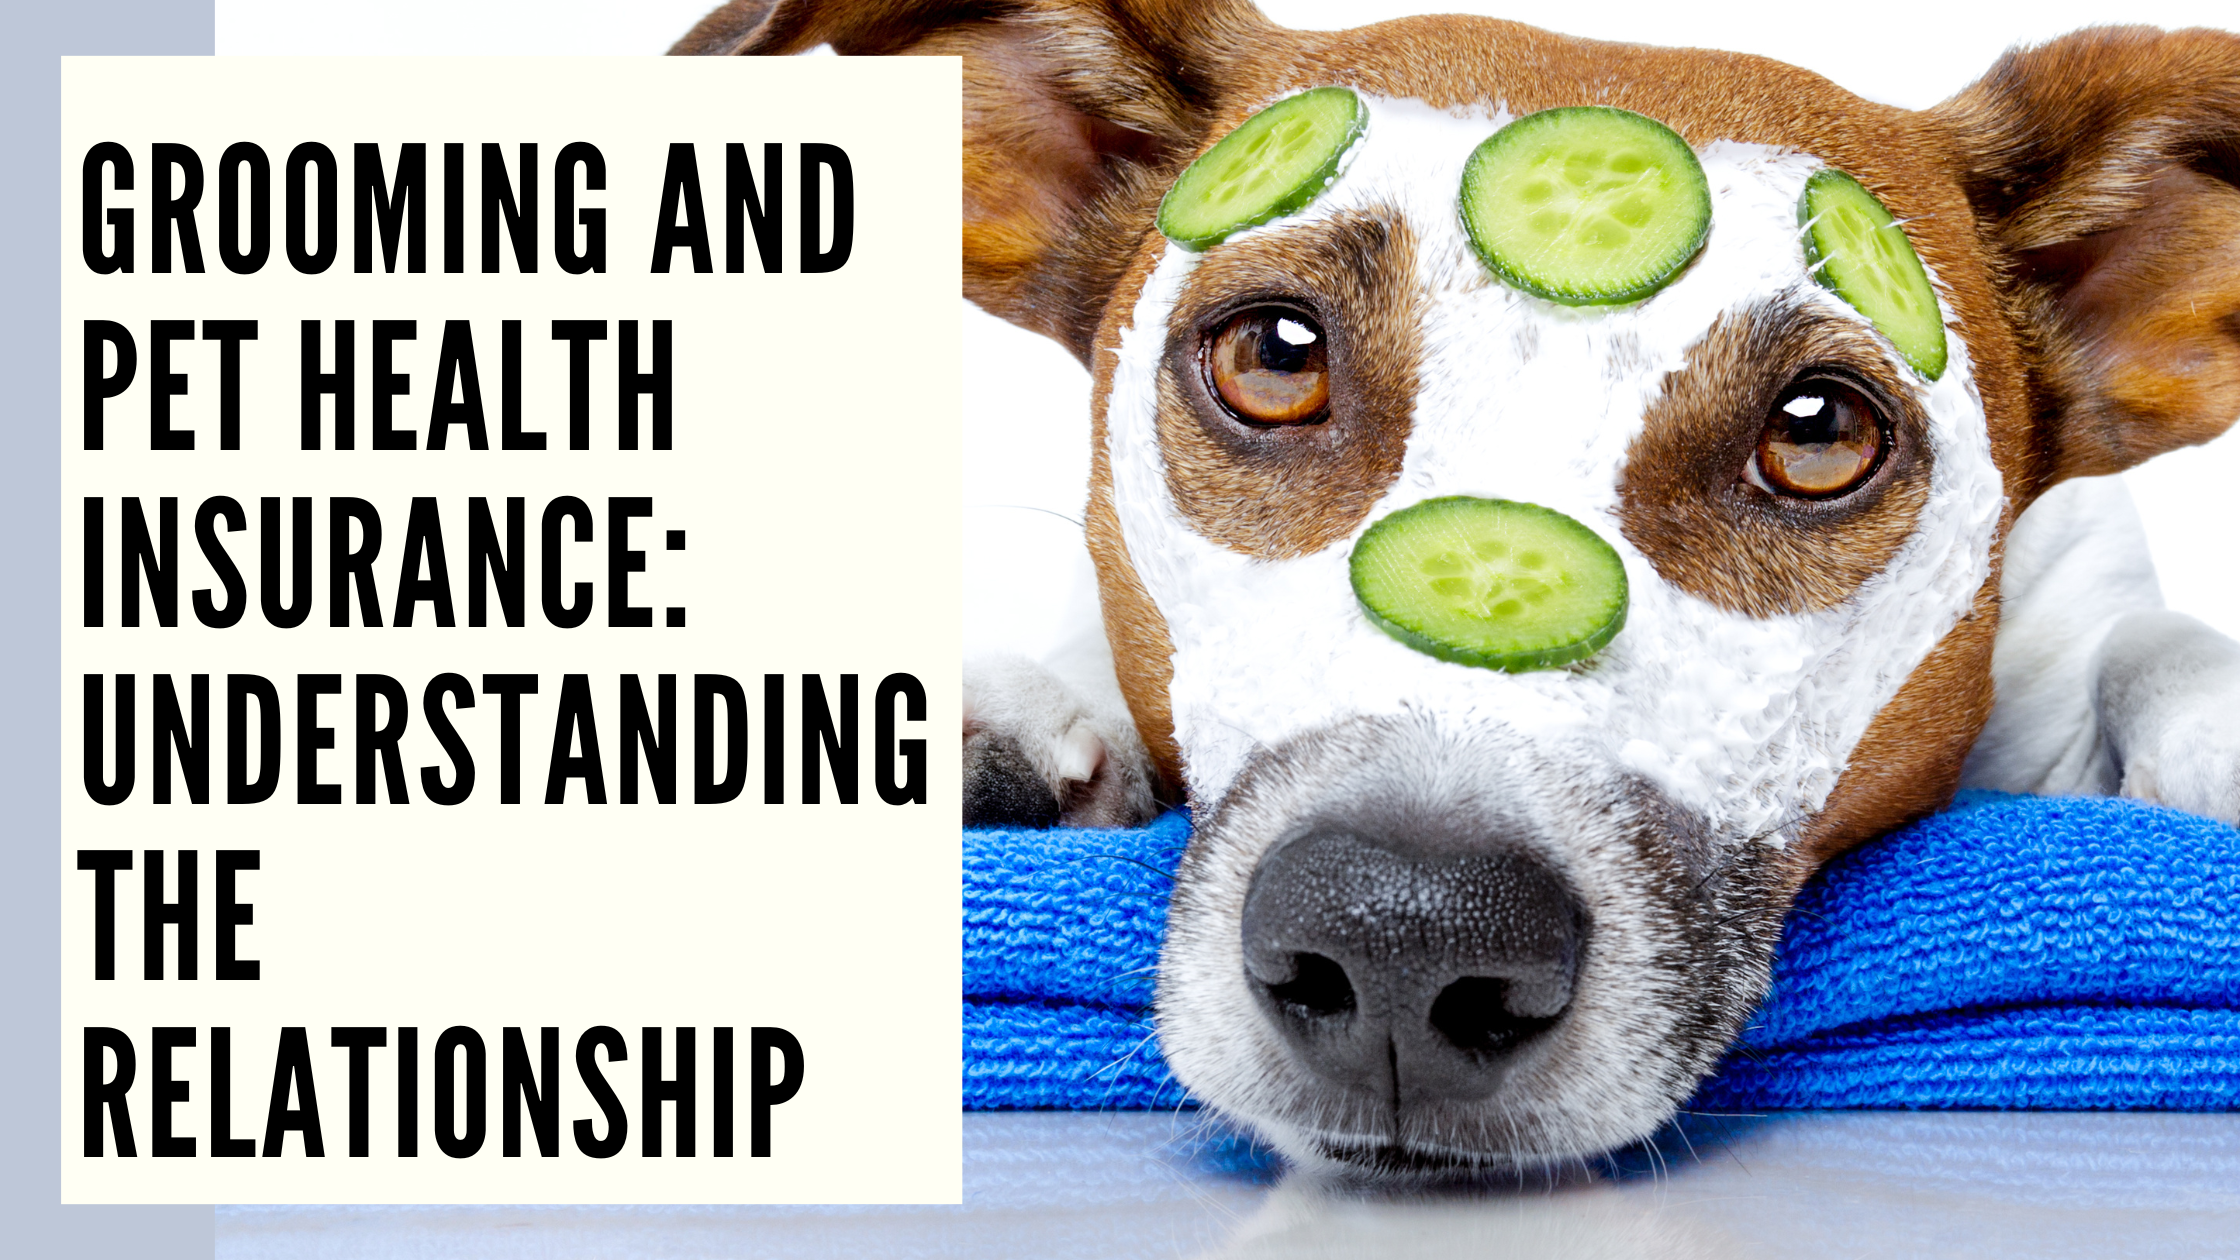 Grooming and Pet Health Insurance Understanding the Relationship